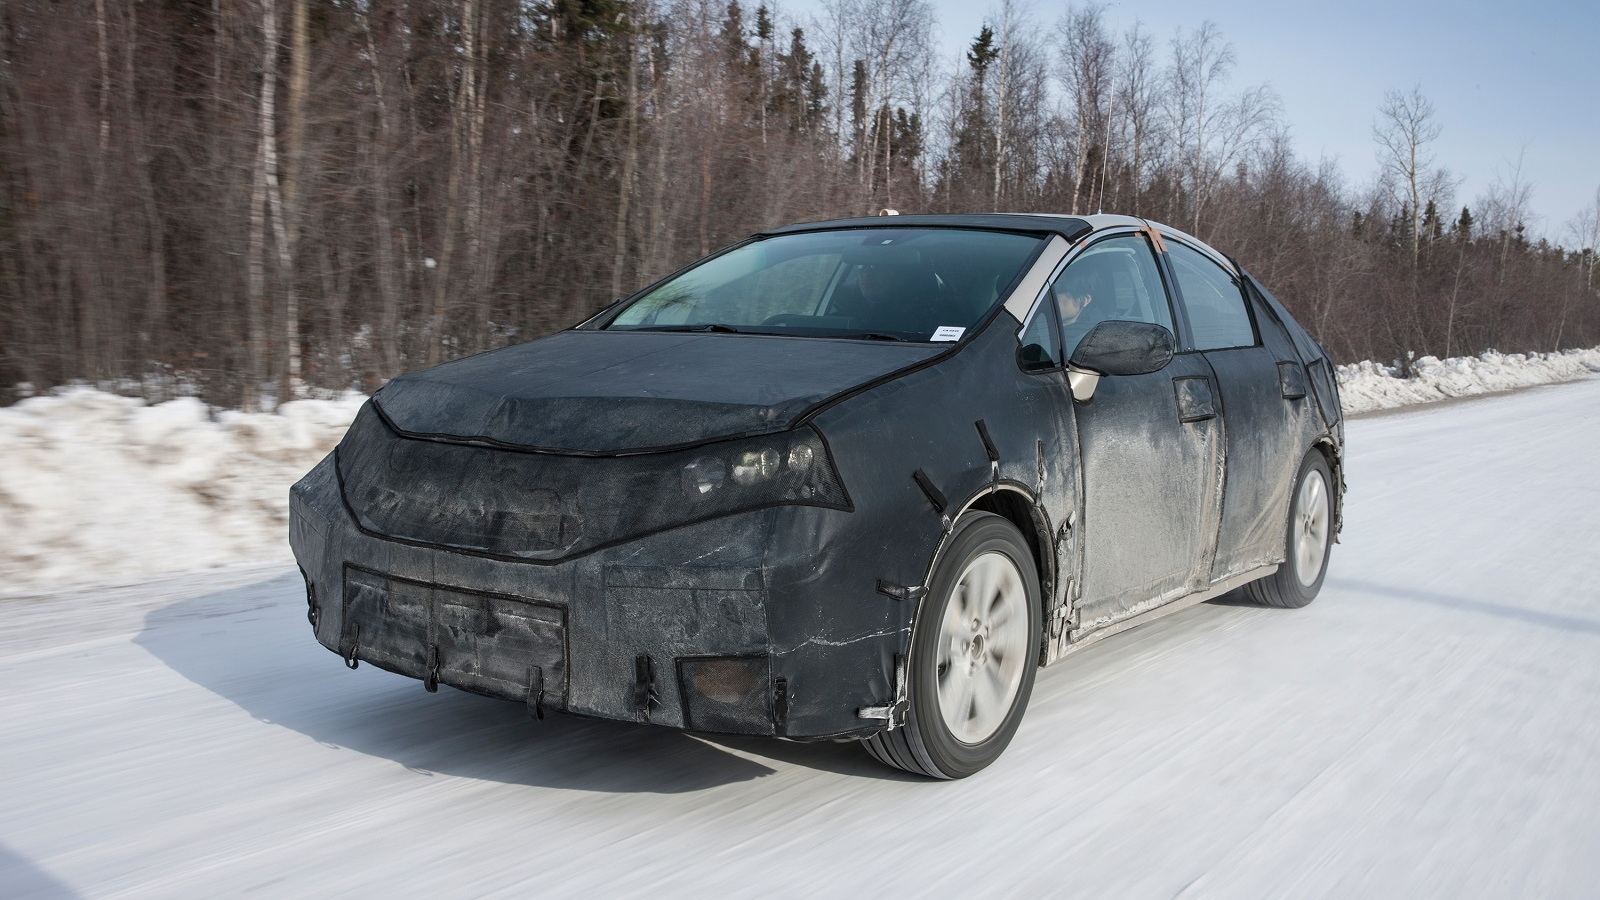 Toyota FCV hydrogen fuel cell vehicle prototype during cold-weather endurance testing in N America